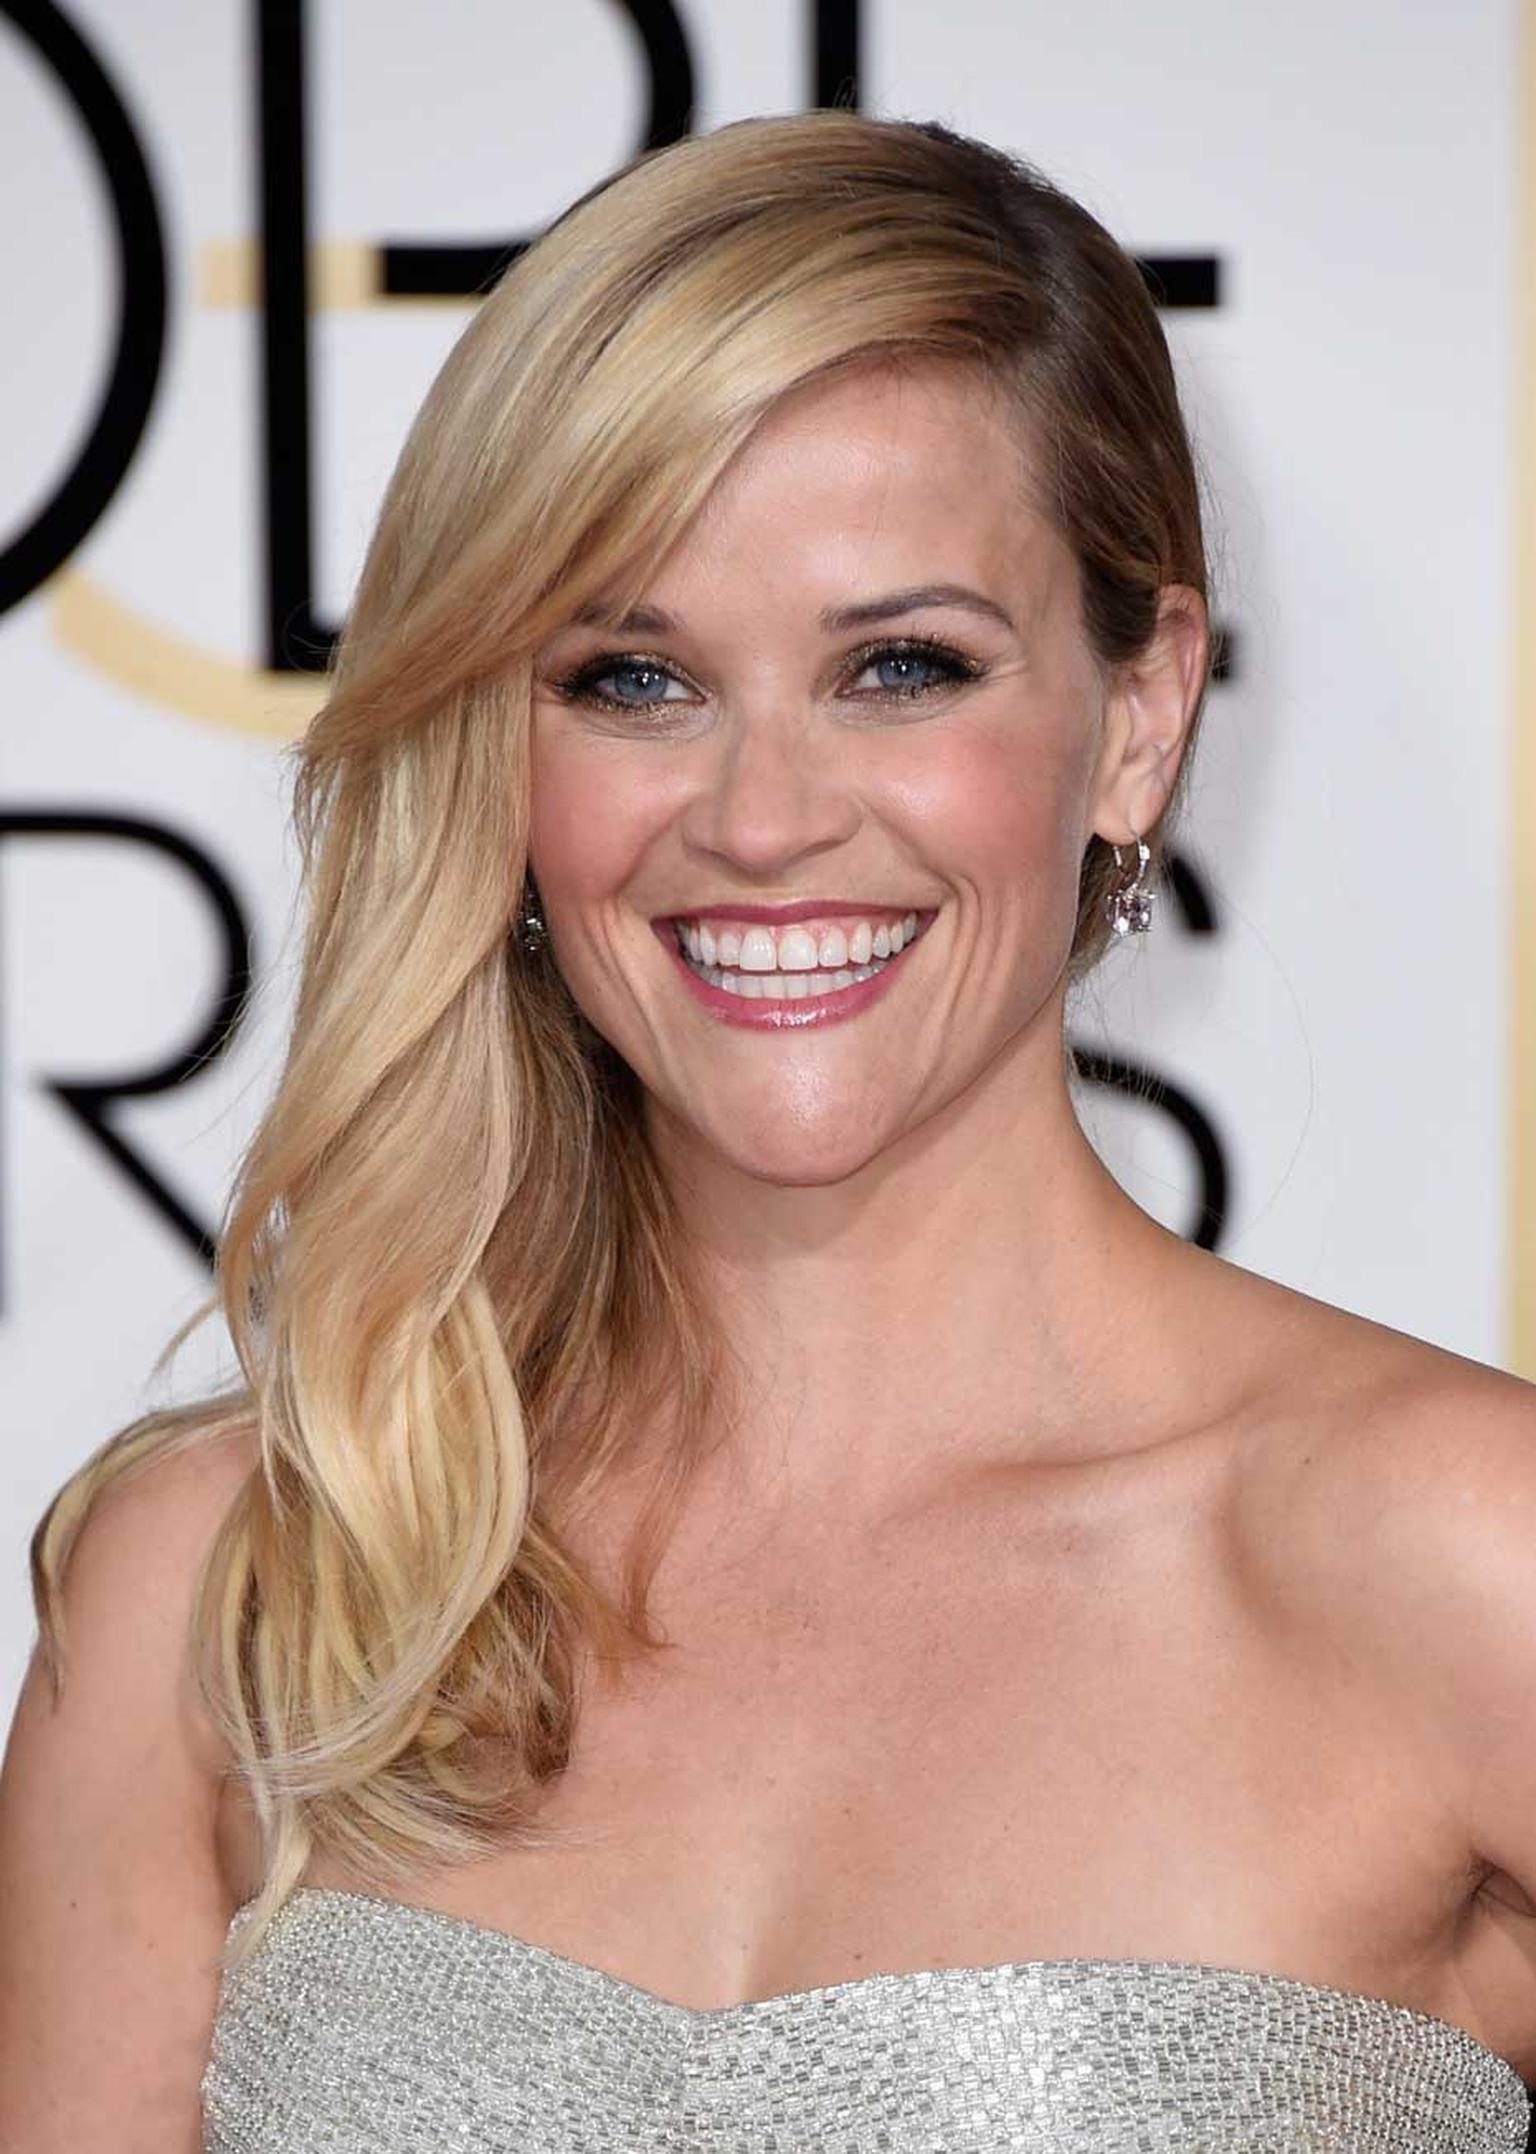 Reese Witherspoon in platinum and diamond earrings and ring from Tiffany & Co. at the 2015 Golden Globes.